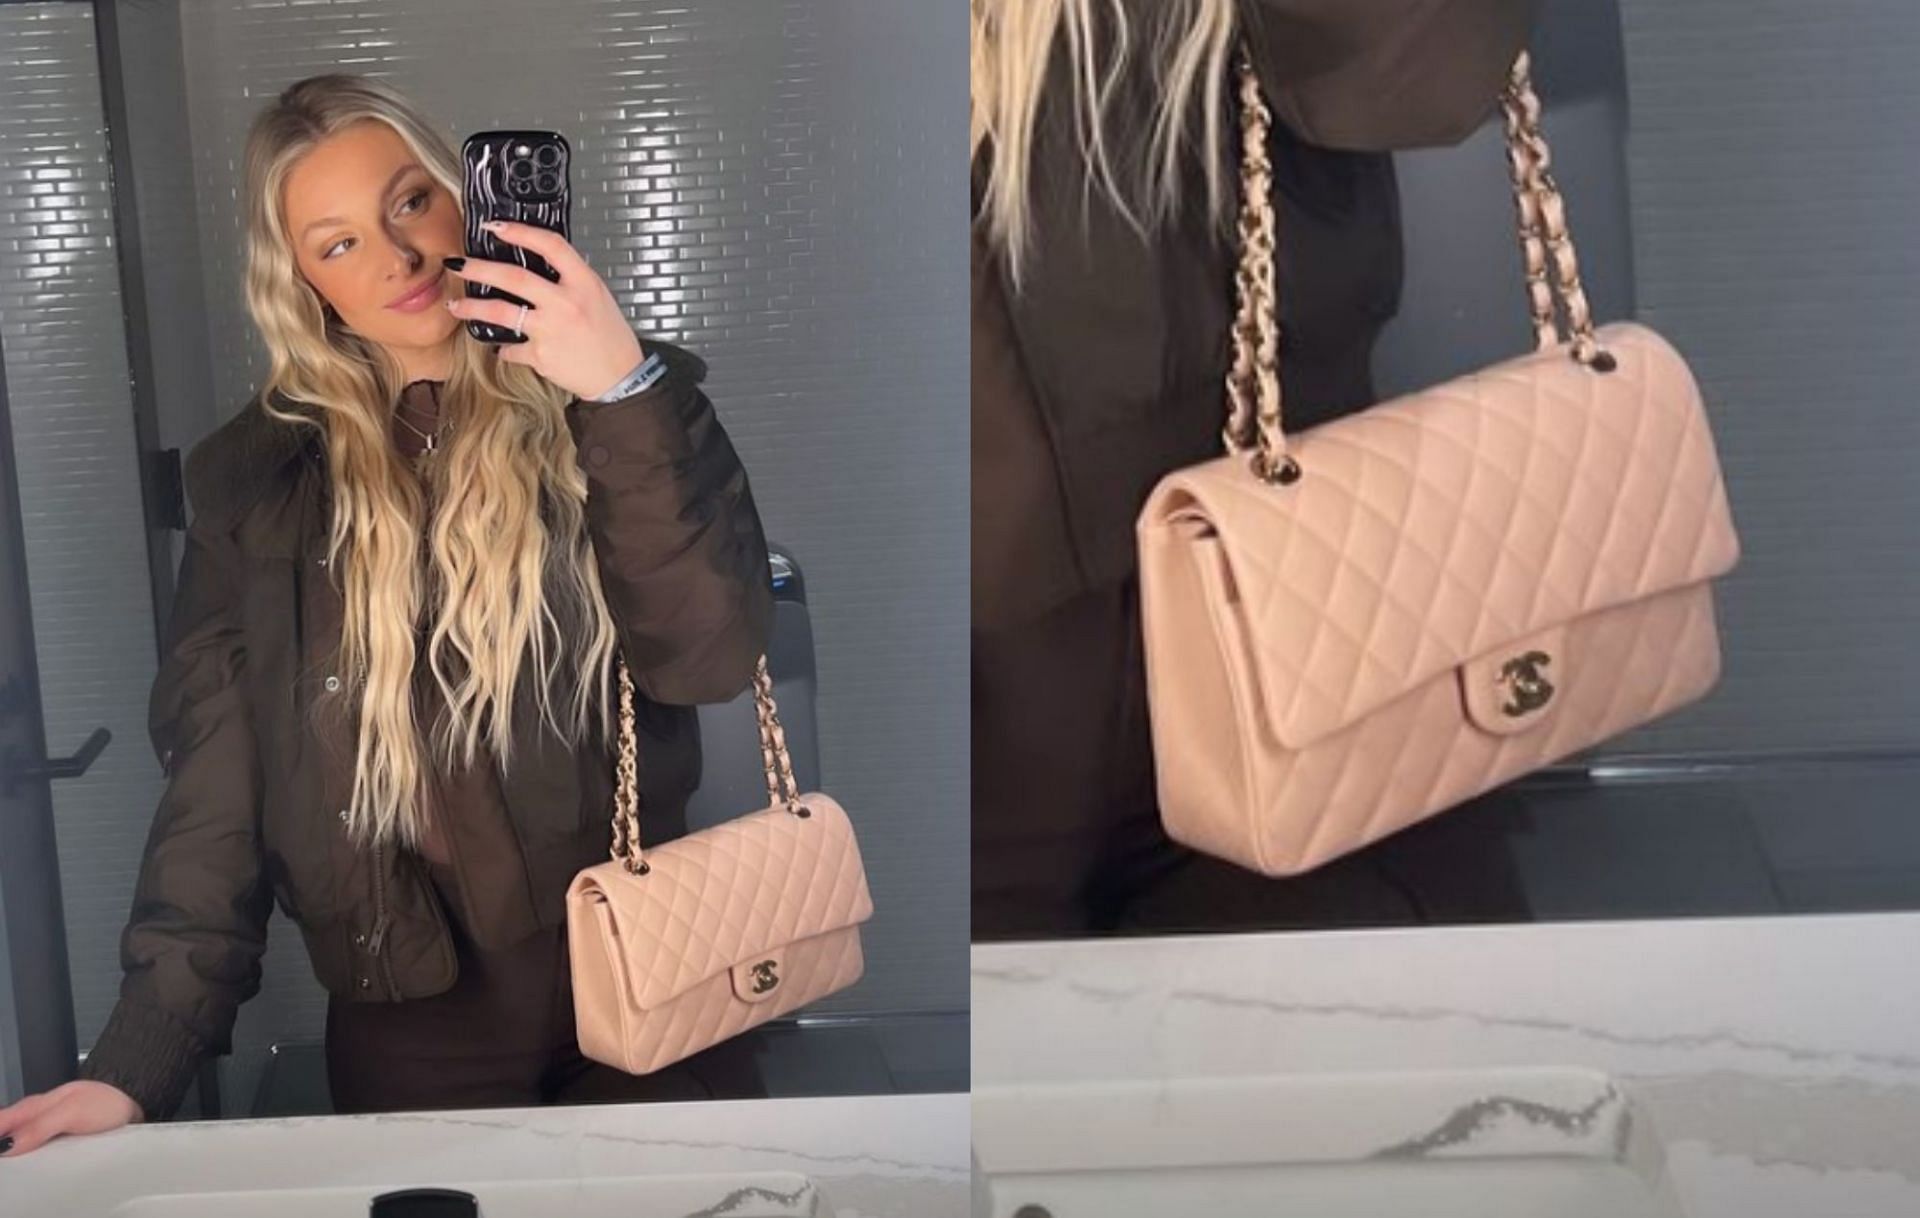 Jade Jones posts on her Instagram story her bathroom selfie while carrying a luxurious Chanel bag